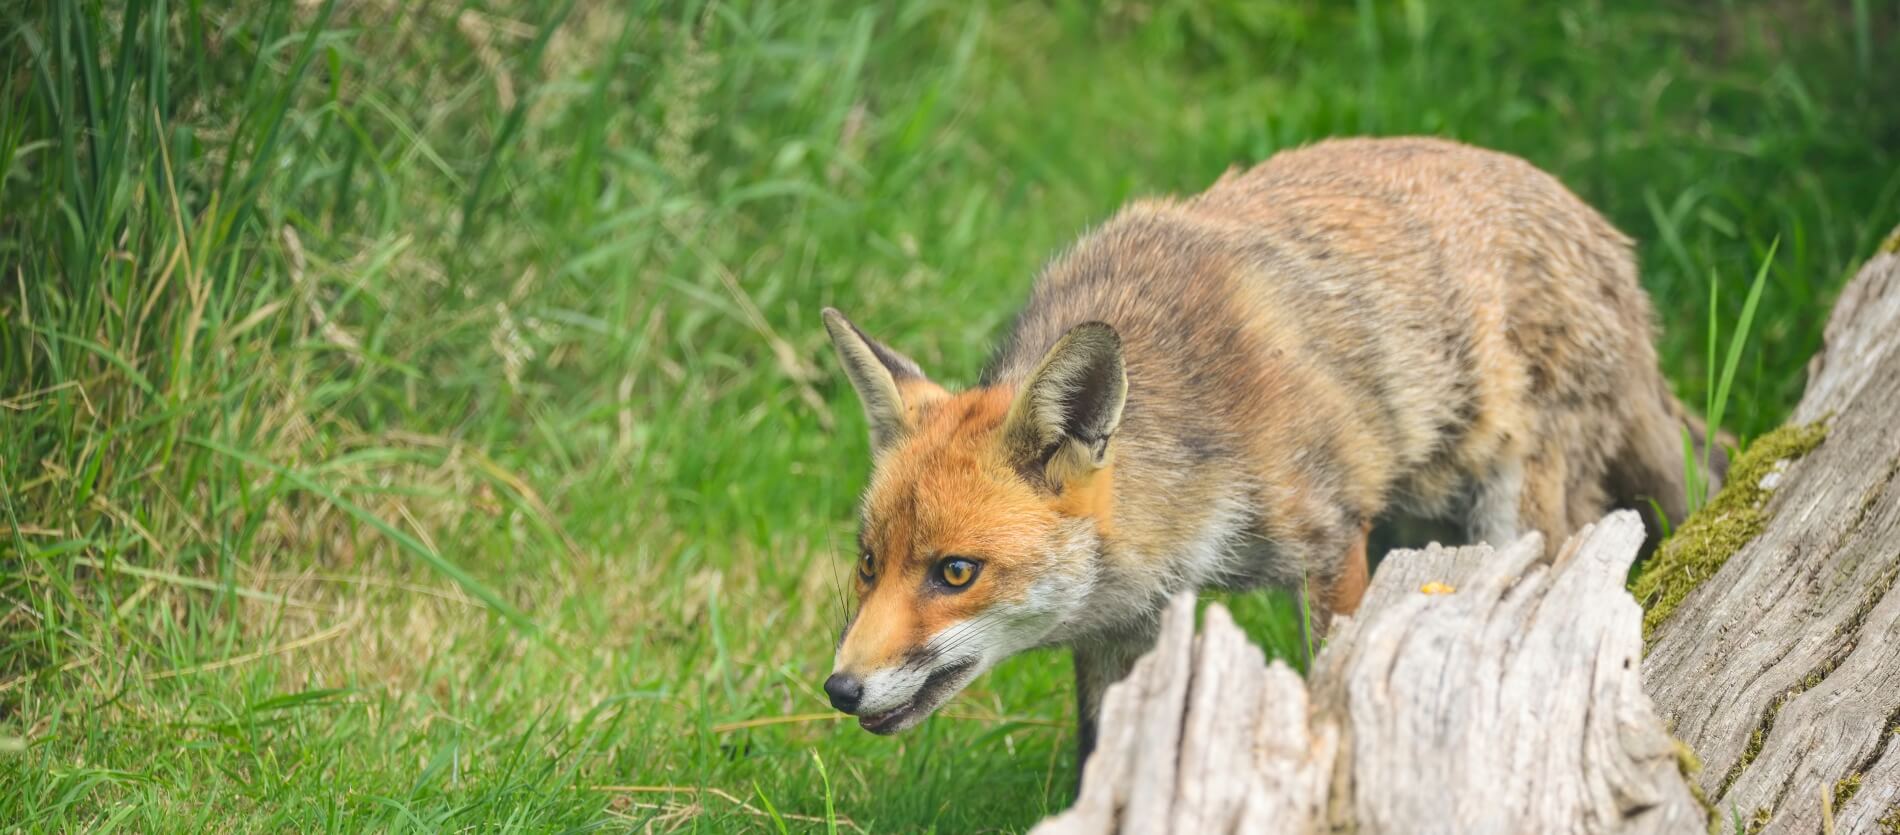 Fox stalking next to some grass and fallen log